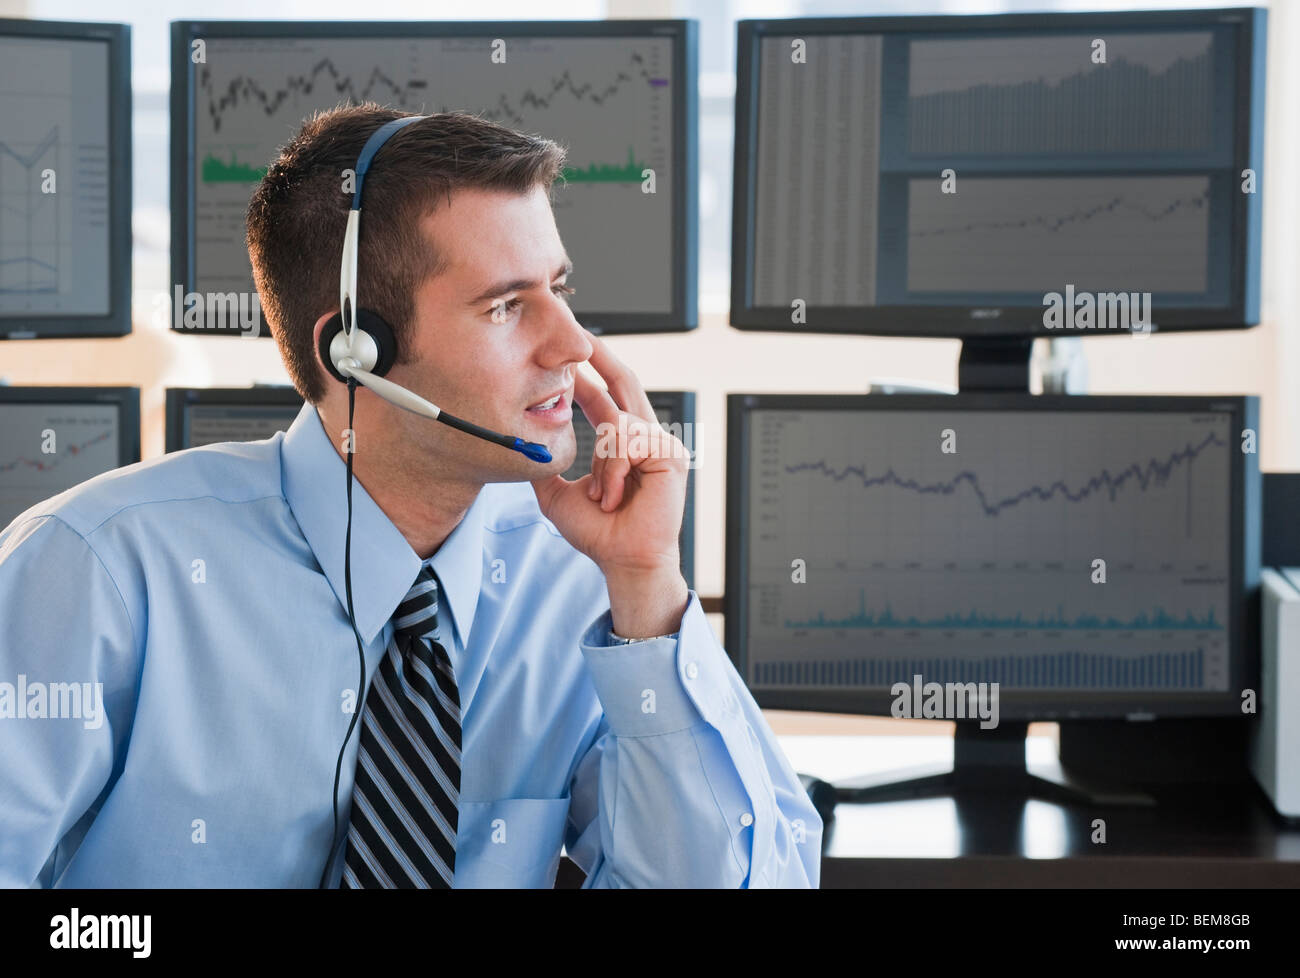 Male trader with headset Stock Photo